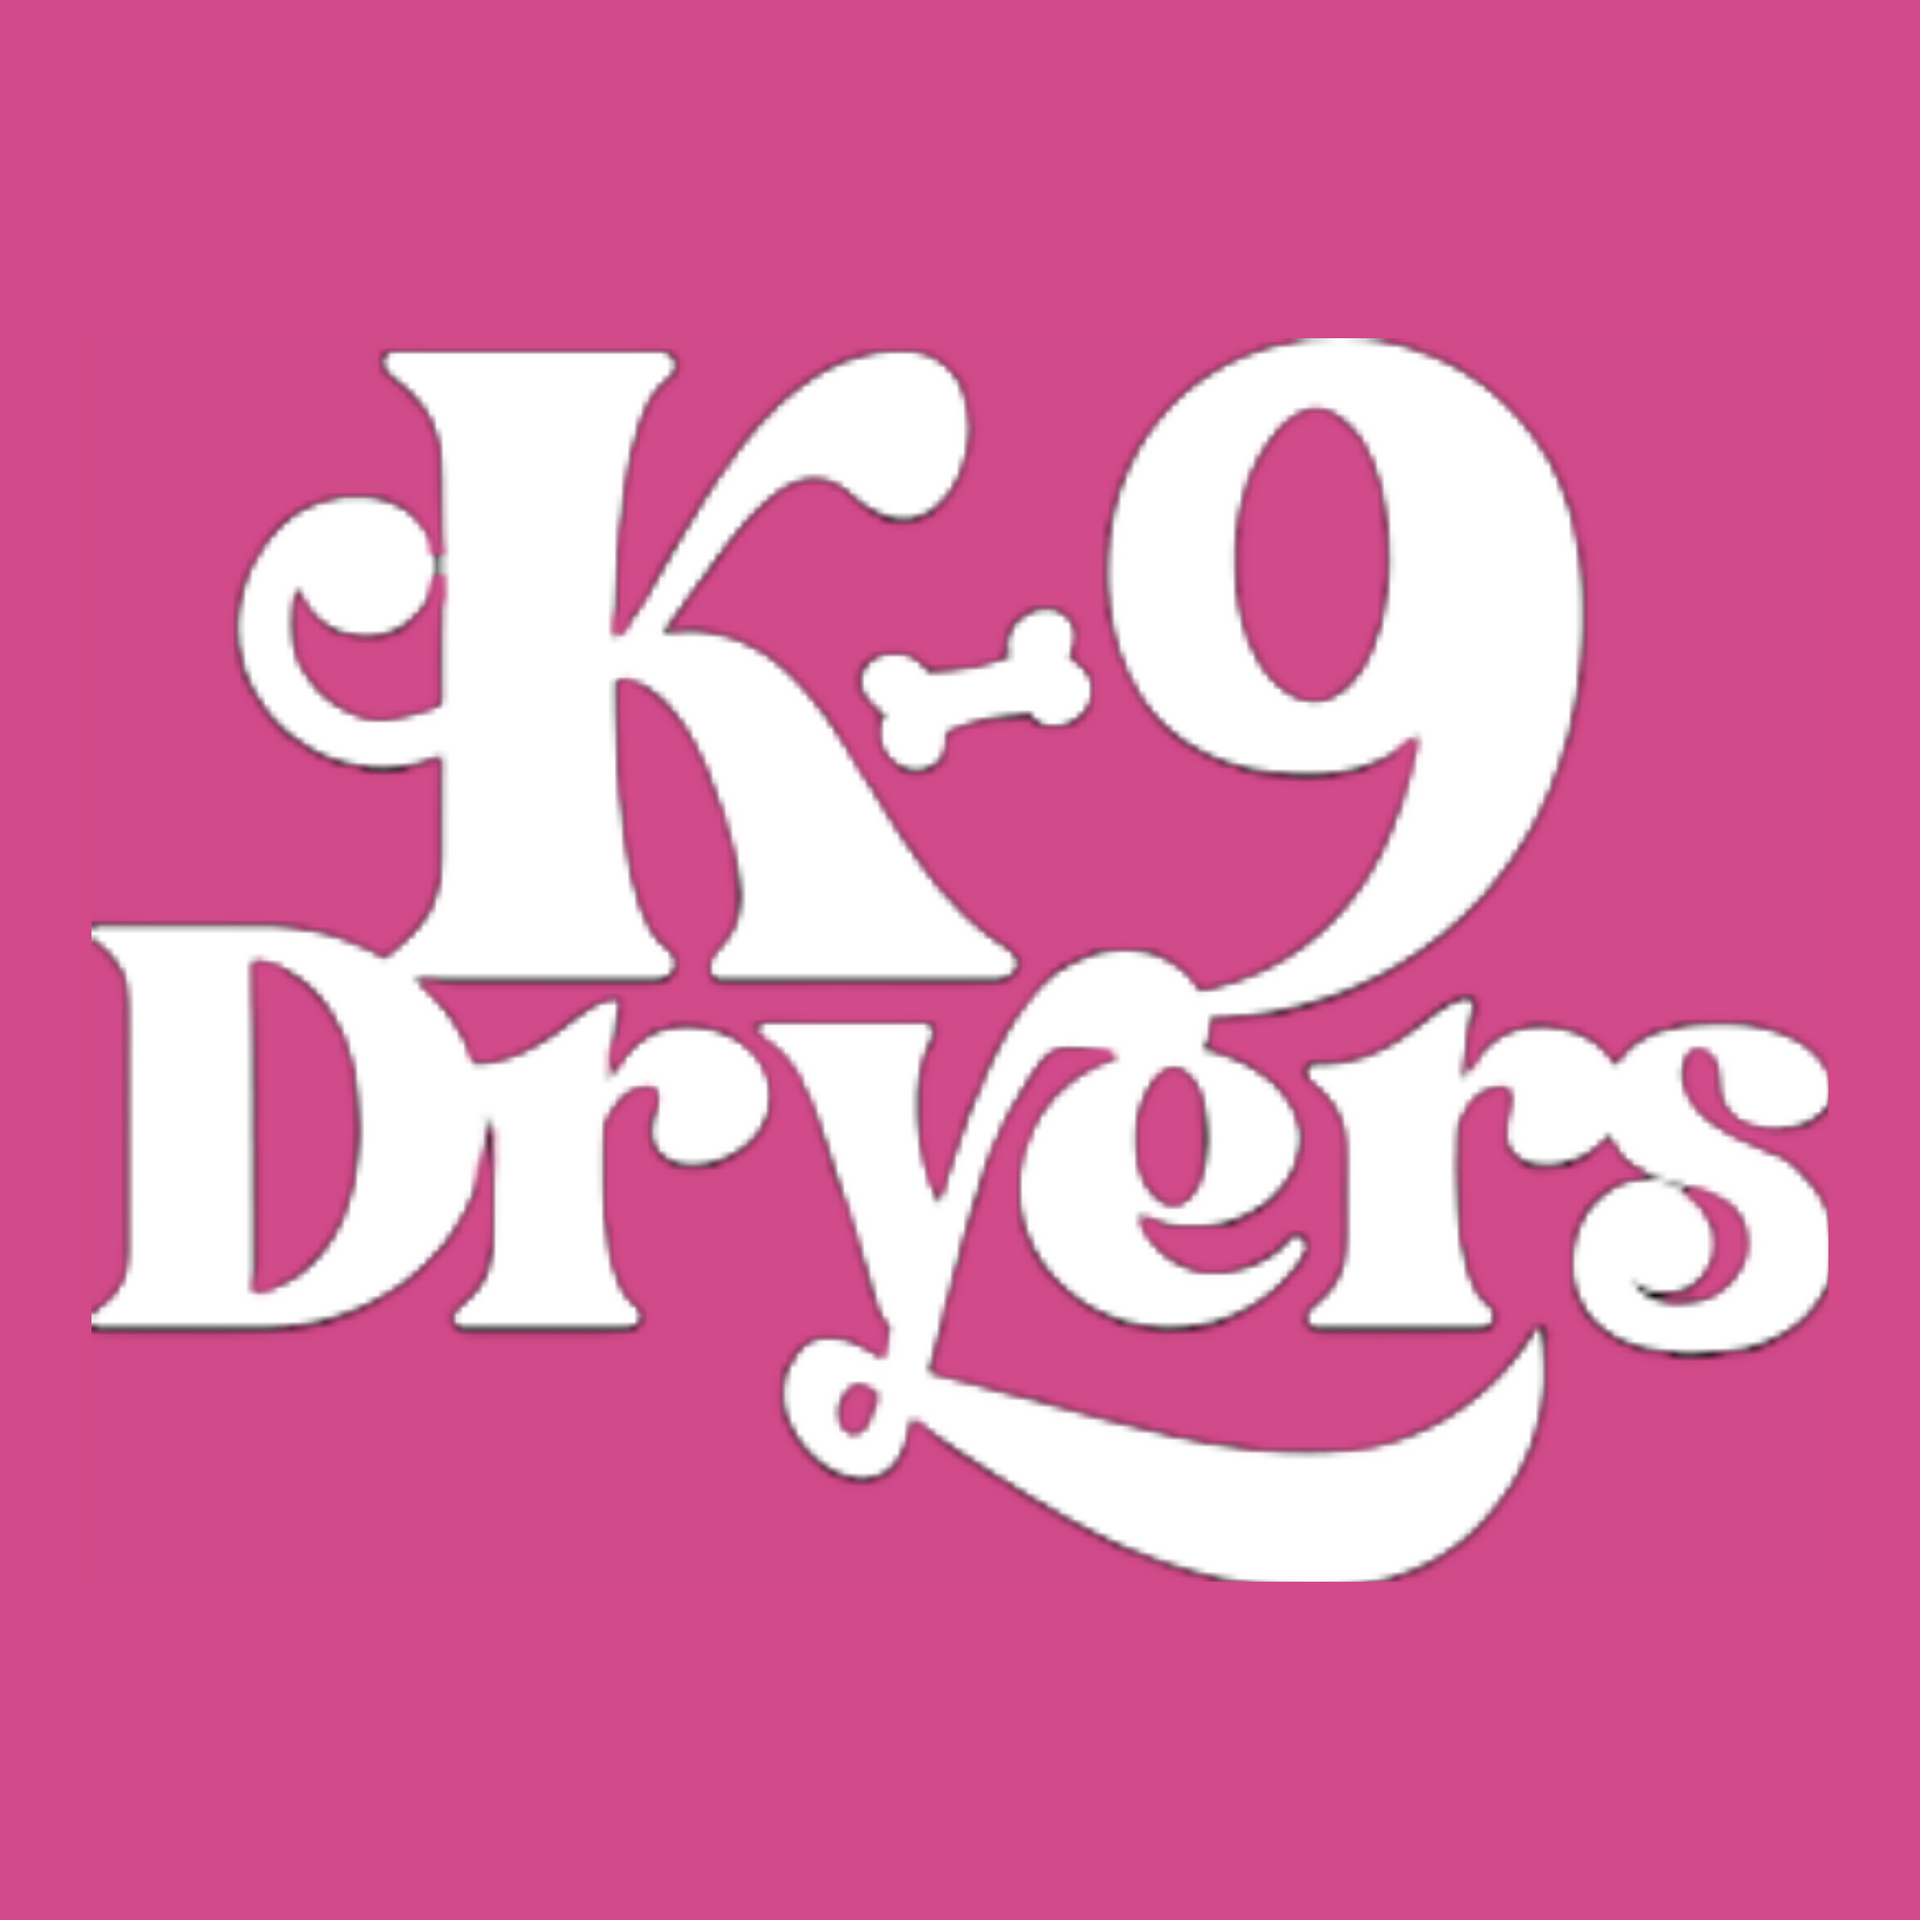 a logo for k-9 dryers on a pink background